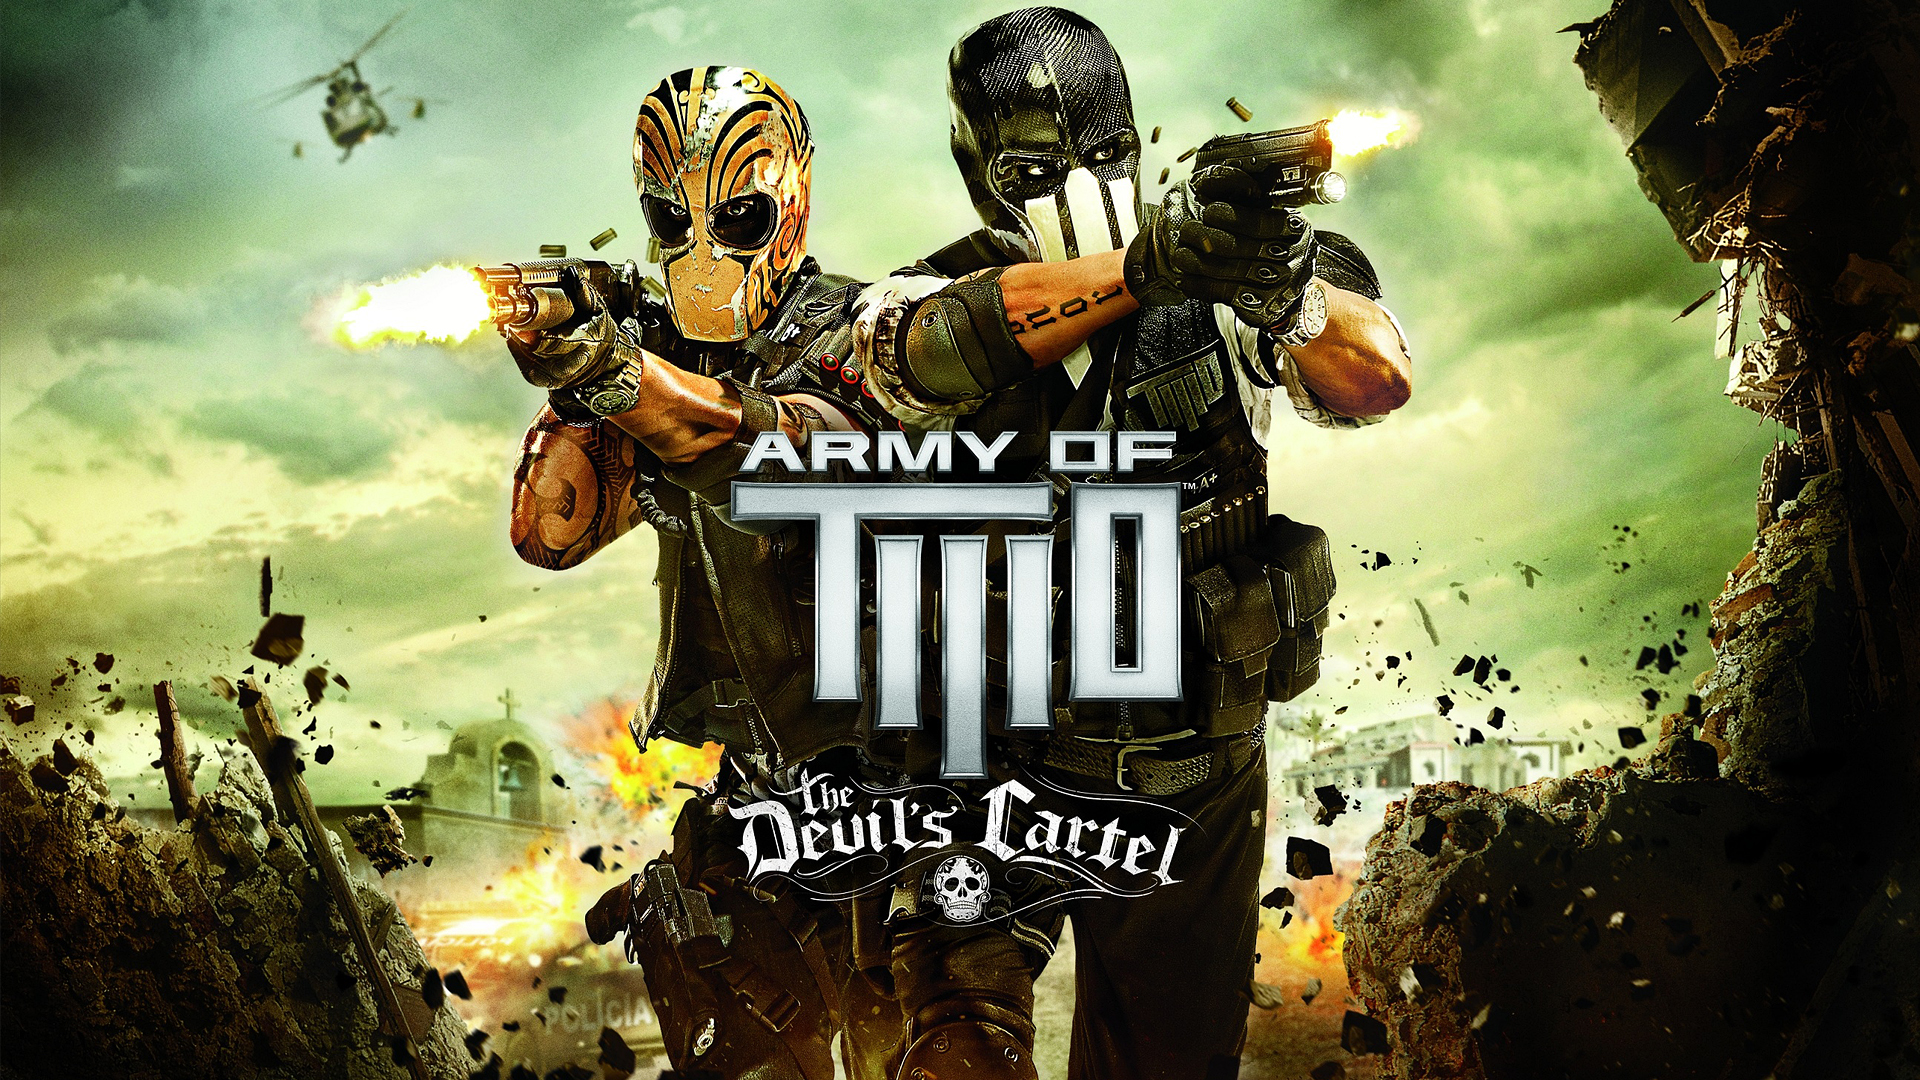 Army Of Two: The Devil's Cartel Backgrounds, Compatible - PC, Mobile, Gadgets| 1920x1080 px